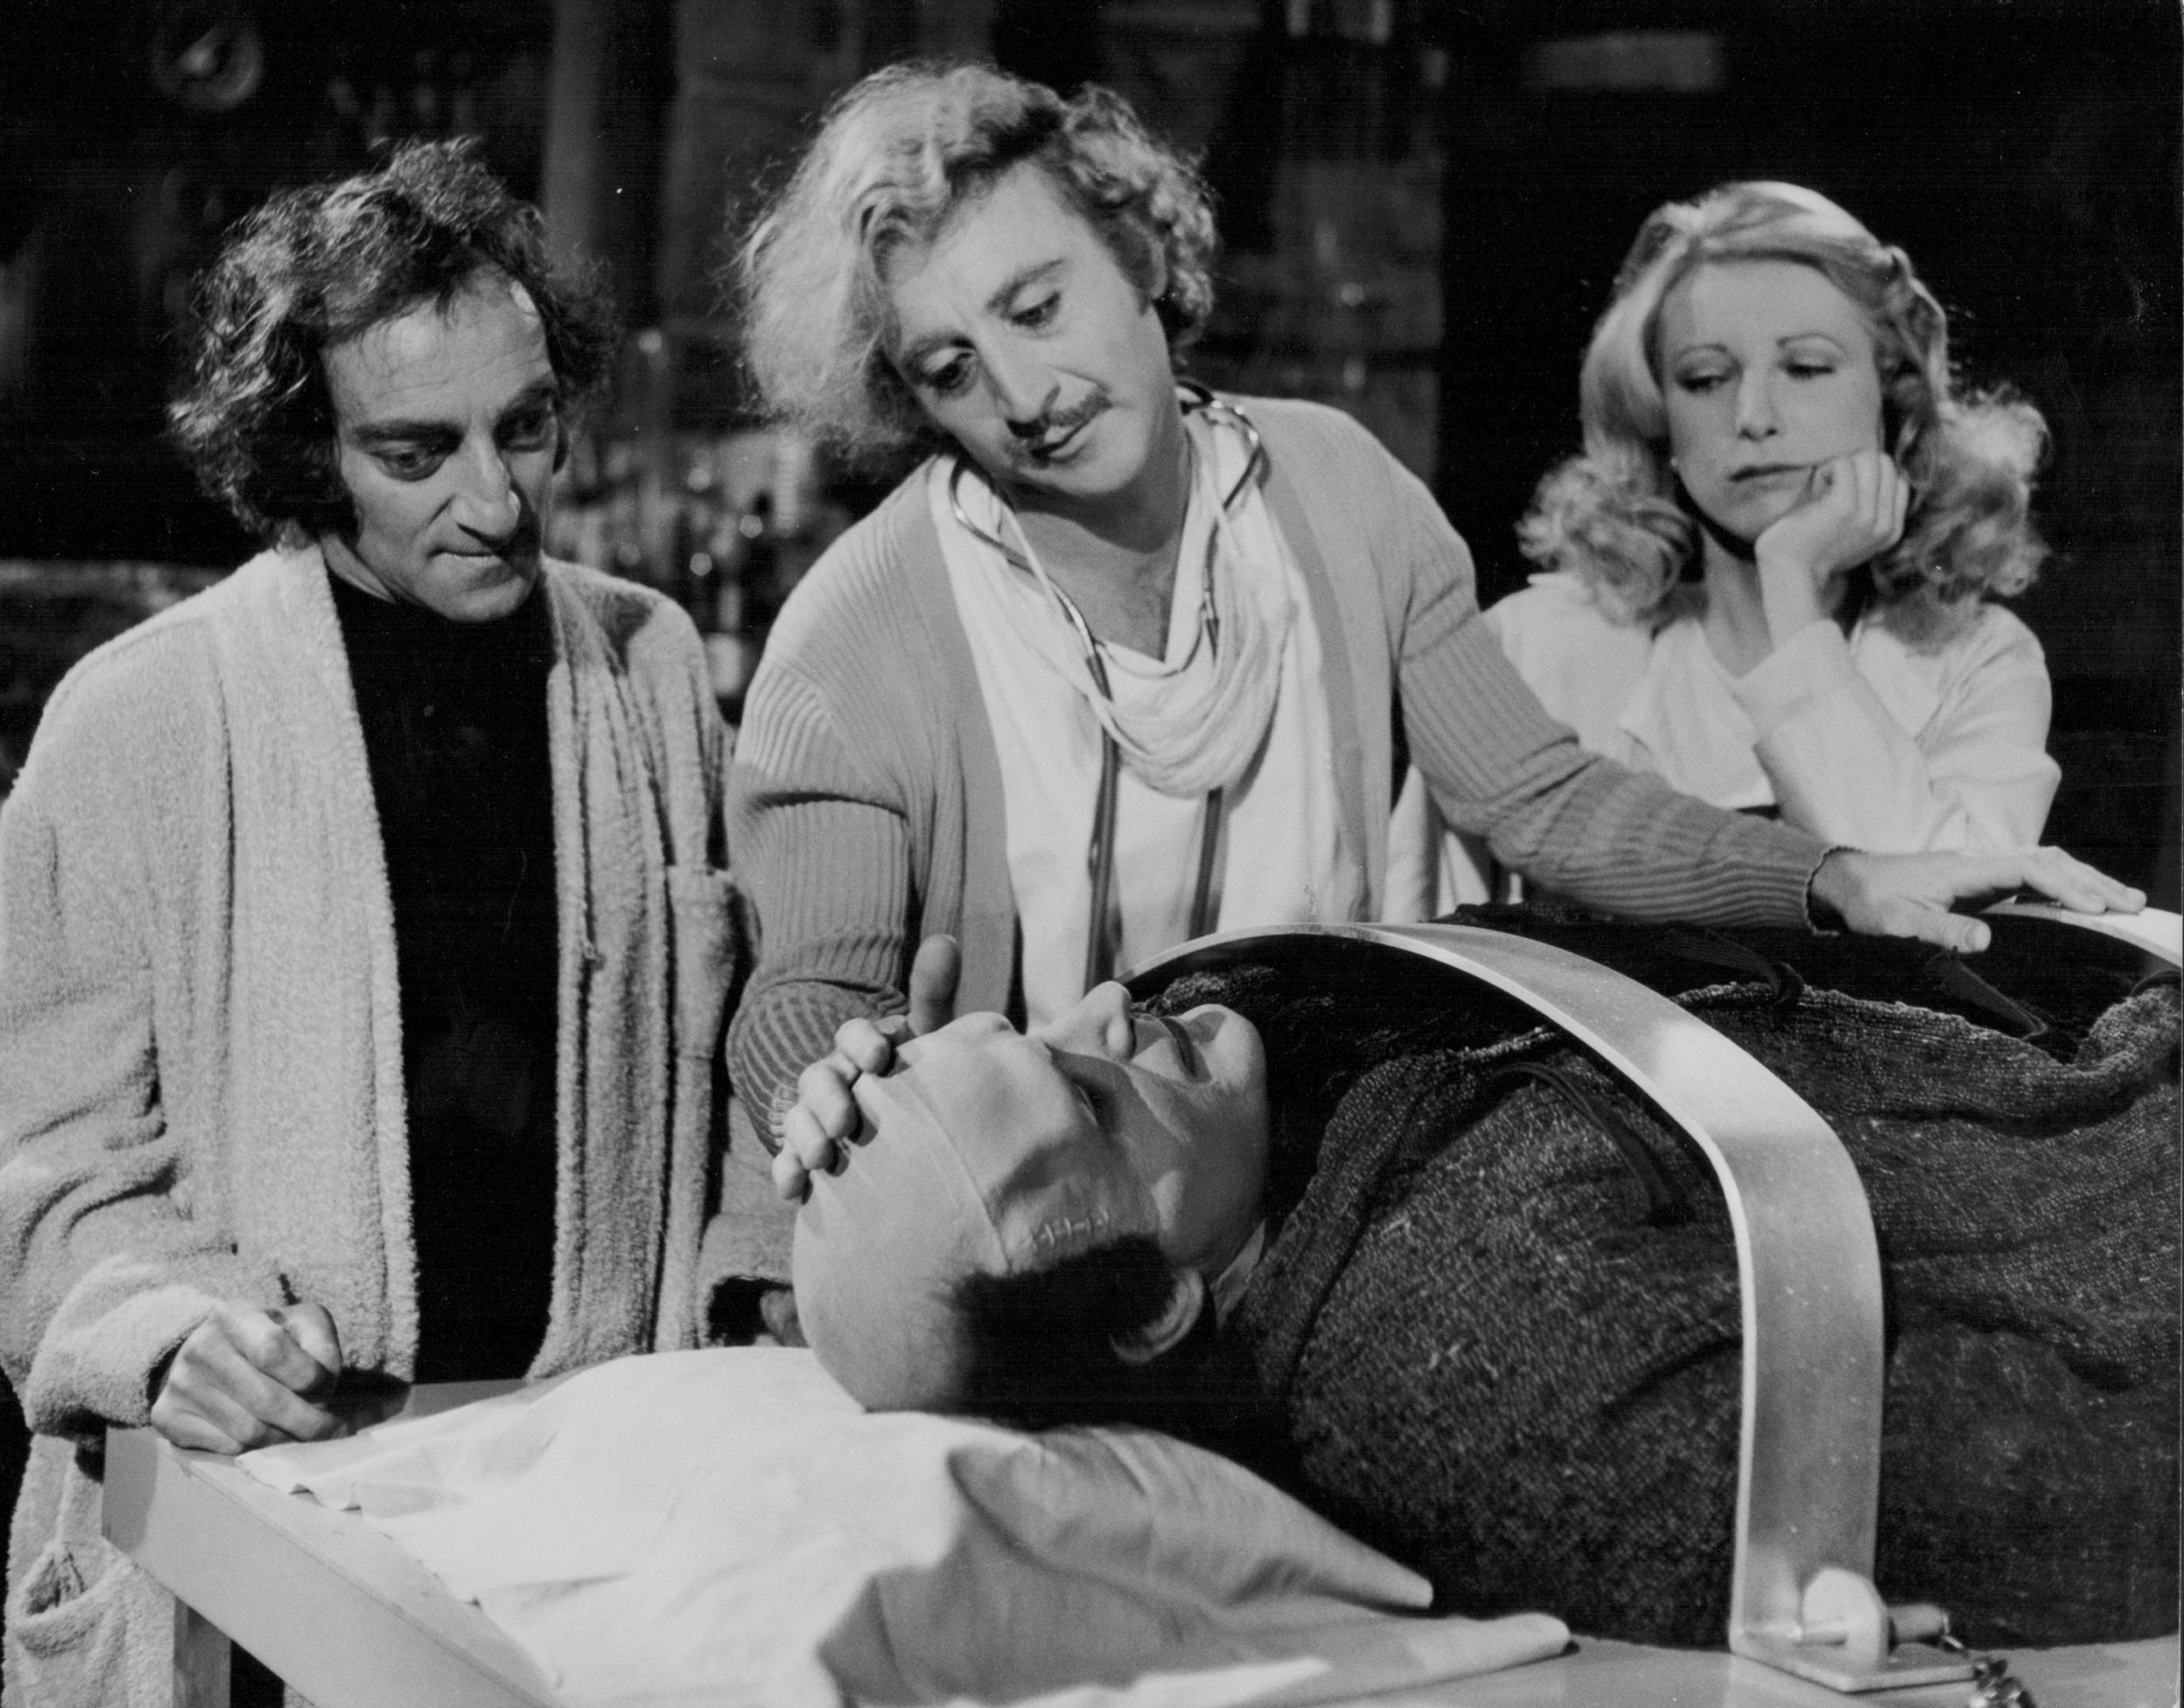 <p>There was no Brooks fatigue in 1974. From a budget of only $2.78 million, <em>Young Frankenstein</em> made a robust $86.2 million. It also has a 94 percent rating on Rotten Tomatoes. The legacy of the comedy has lasted, as AFI listed it as the 13th best comedy movie of all time on their list of the 100 best comedies ever.</p><p>You may also like: <a href='https://www.yardbarker.com/entertainment/articles/25_of_the_best_rap_sung_collaborations/s1__37656740'>25 of the best rap-sung collaborations</a></p>